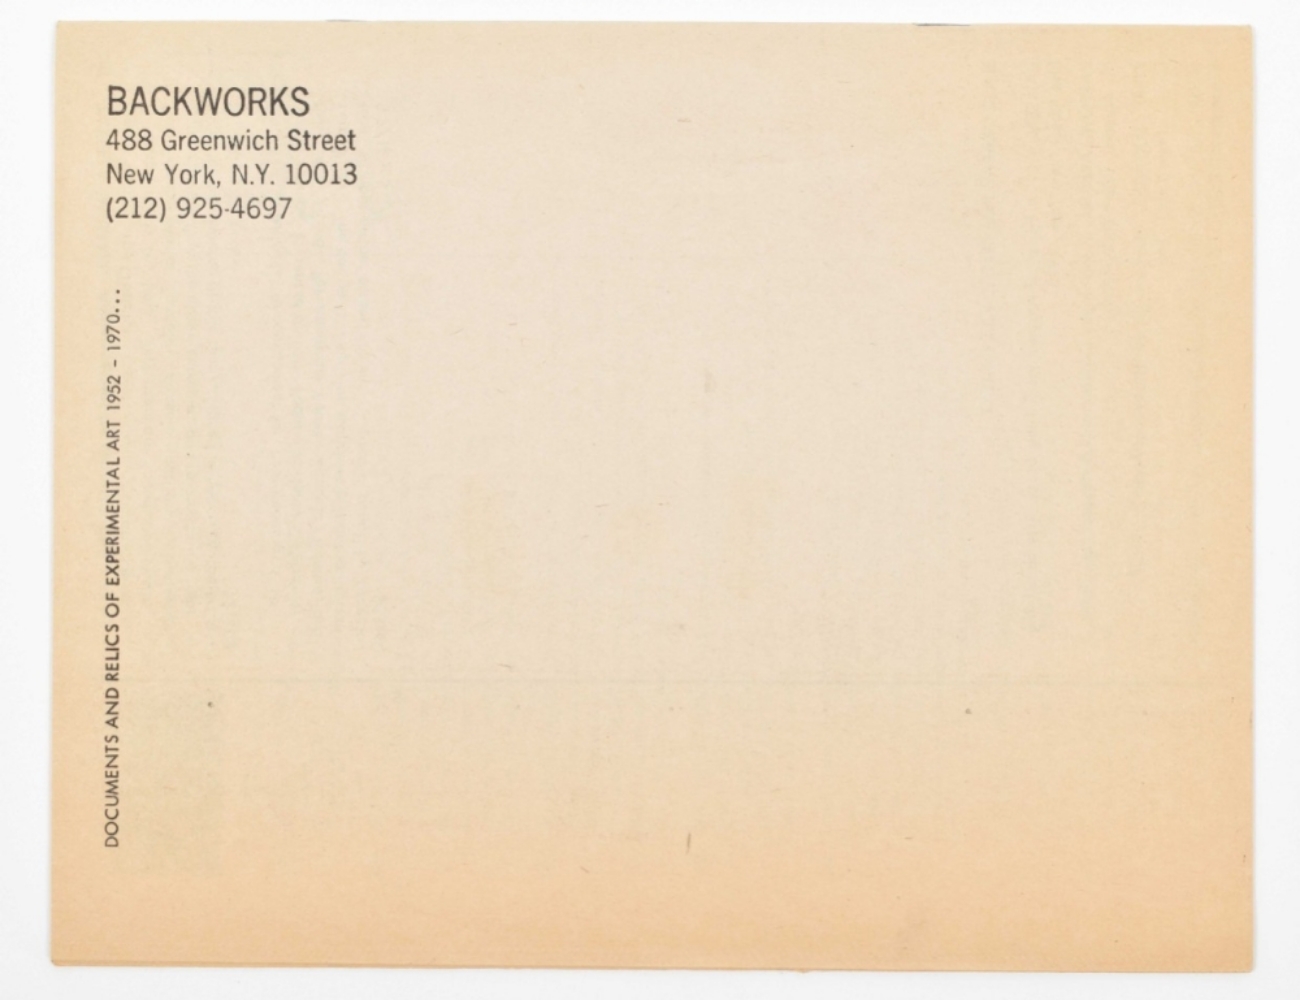 Sales catalogue Was ist Backworks? Documents and Relics of experimental art 1952-1970 - Image 2 of 5